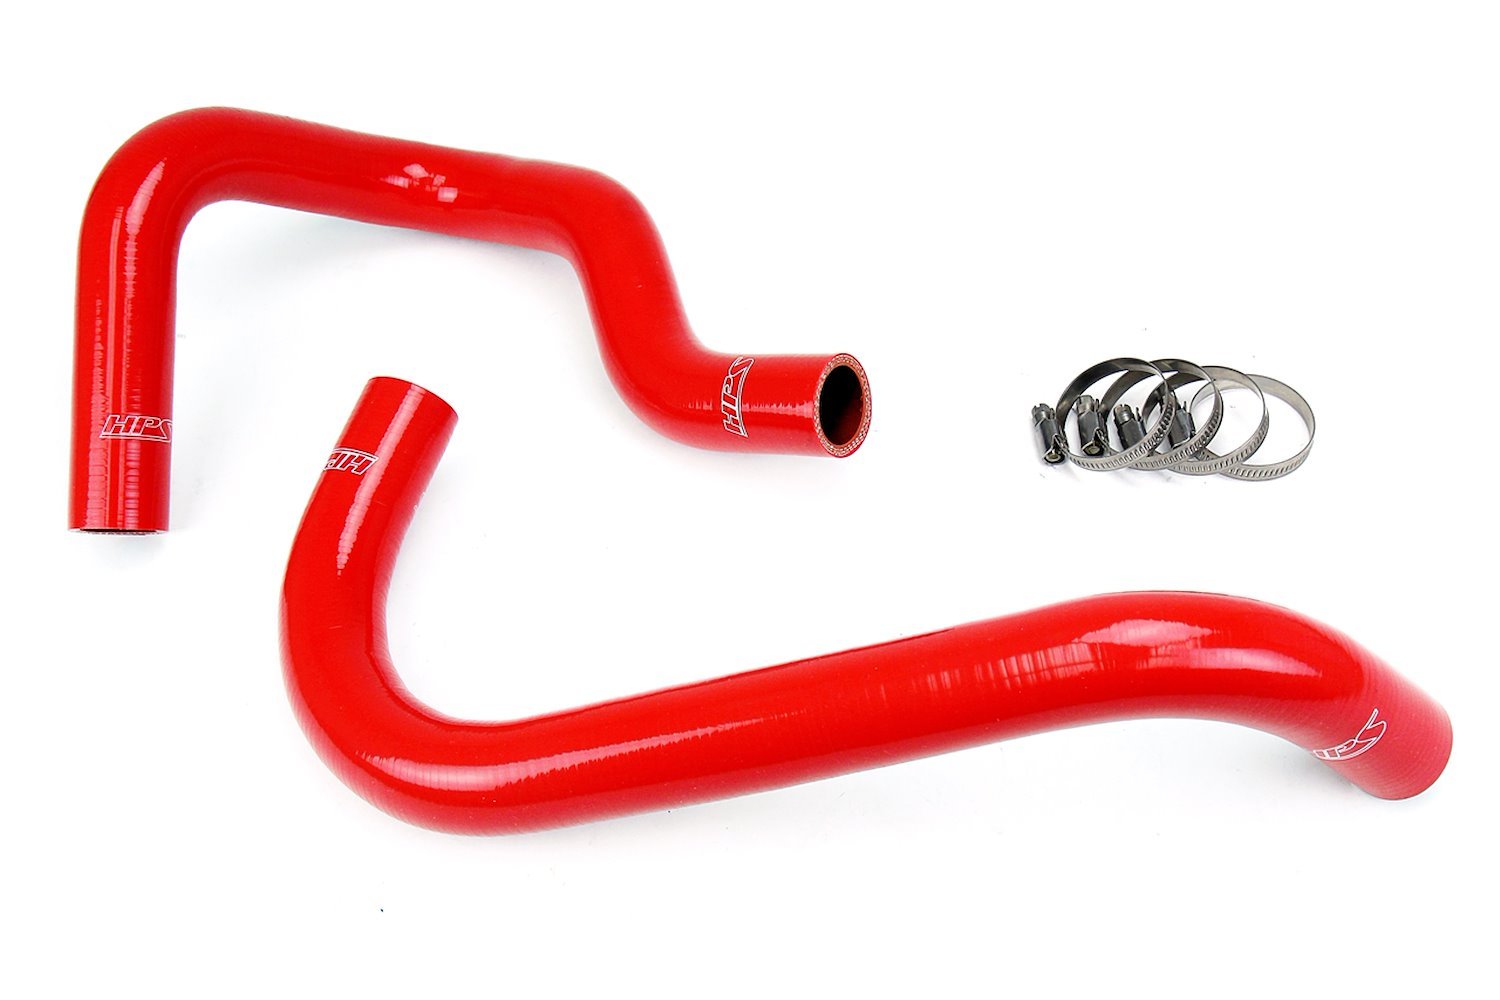 57-1746R-RED Radiator Hose Kit, High-Temp 3-Ply Reinforced Silicone, Replace OEM Rubber Radiator Coolant Hoses